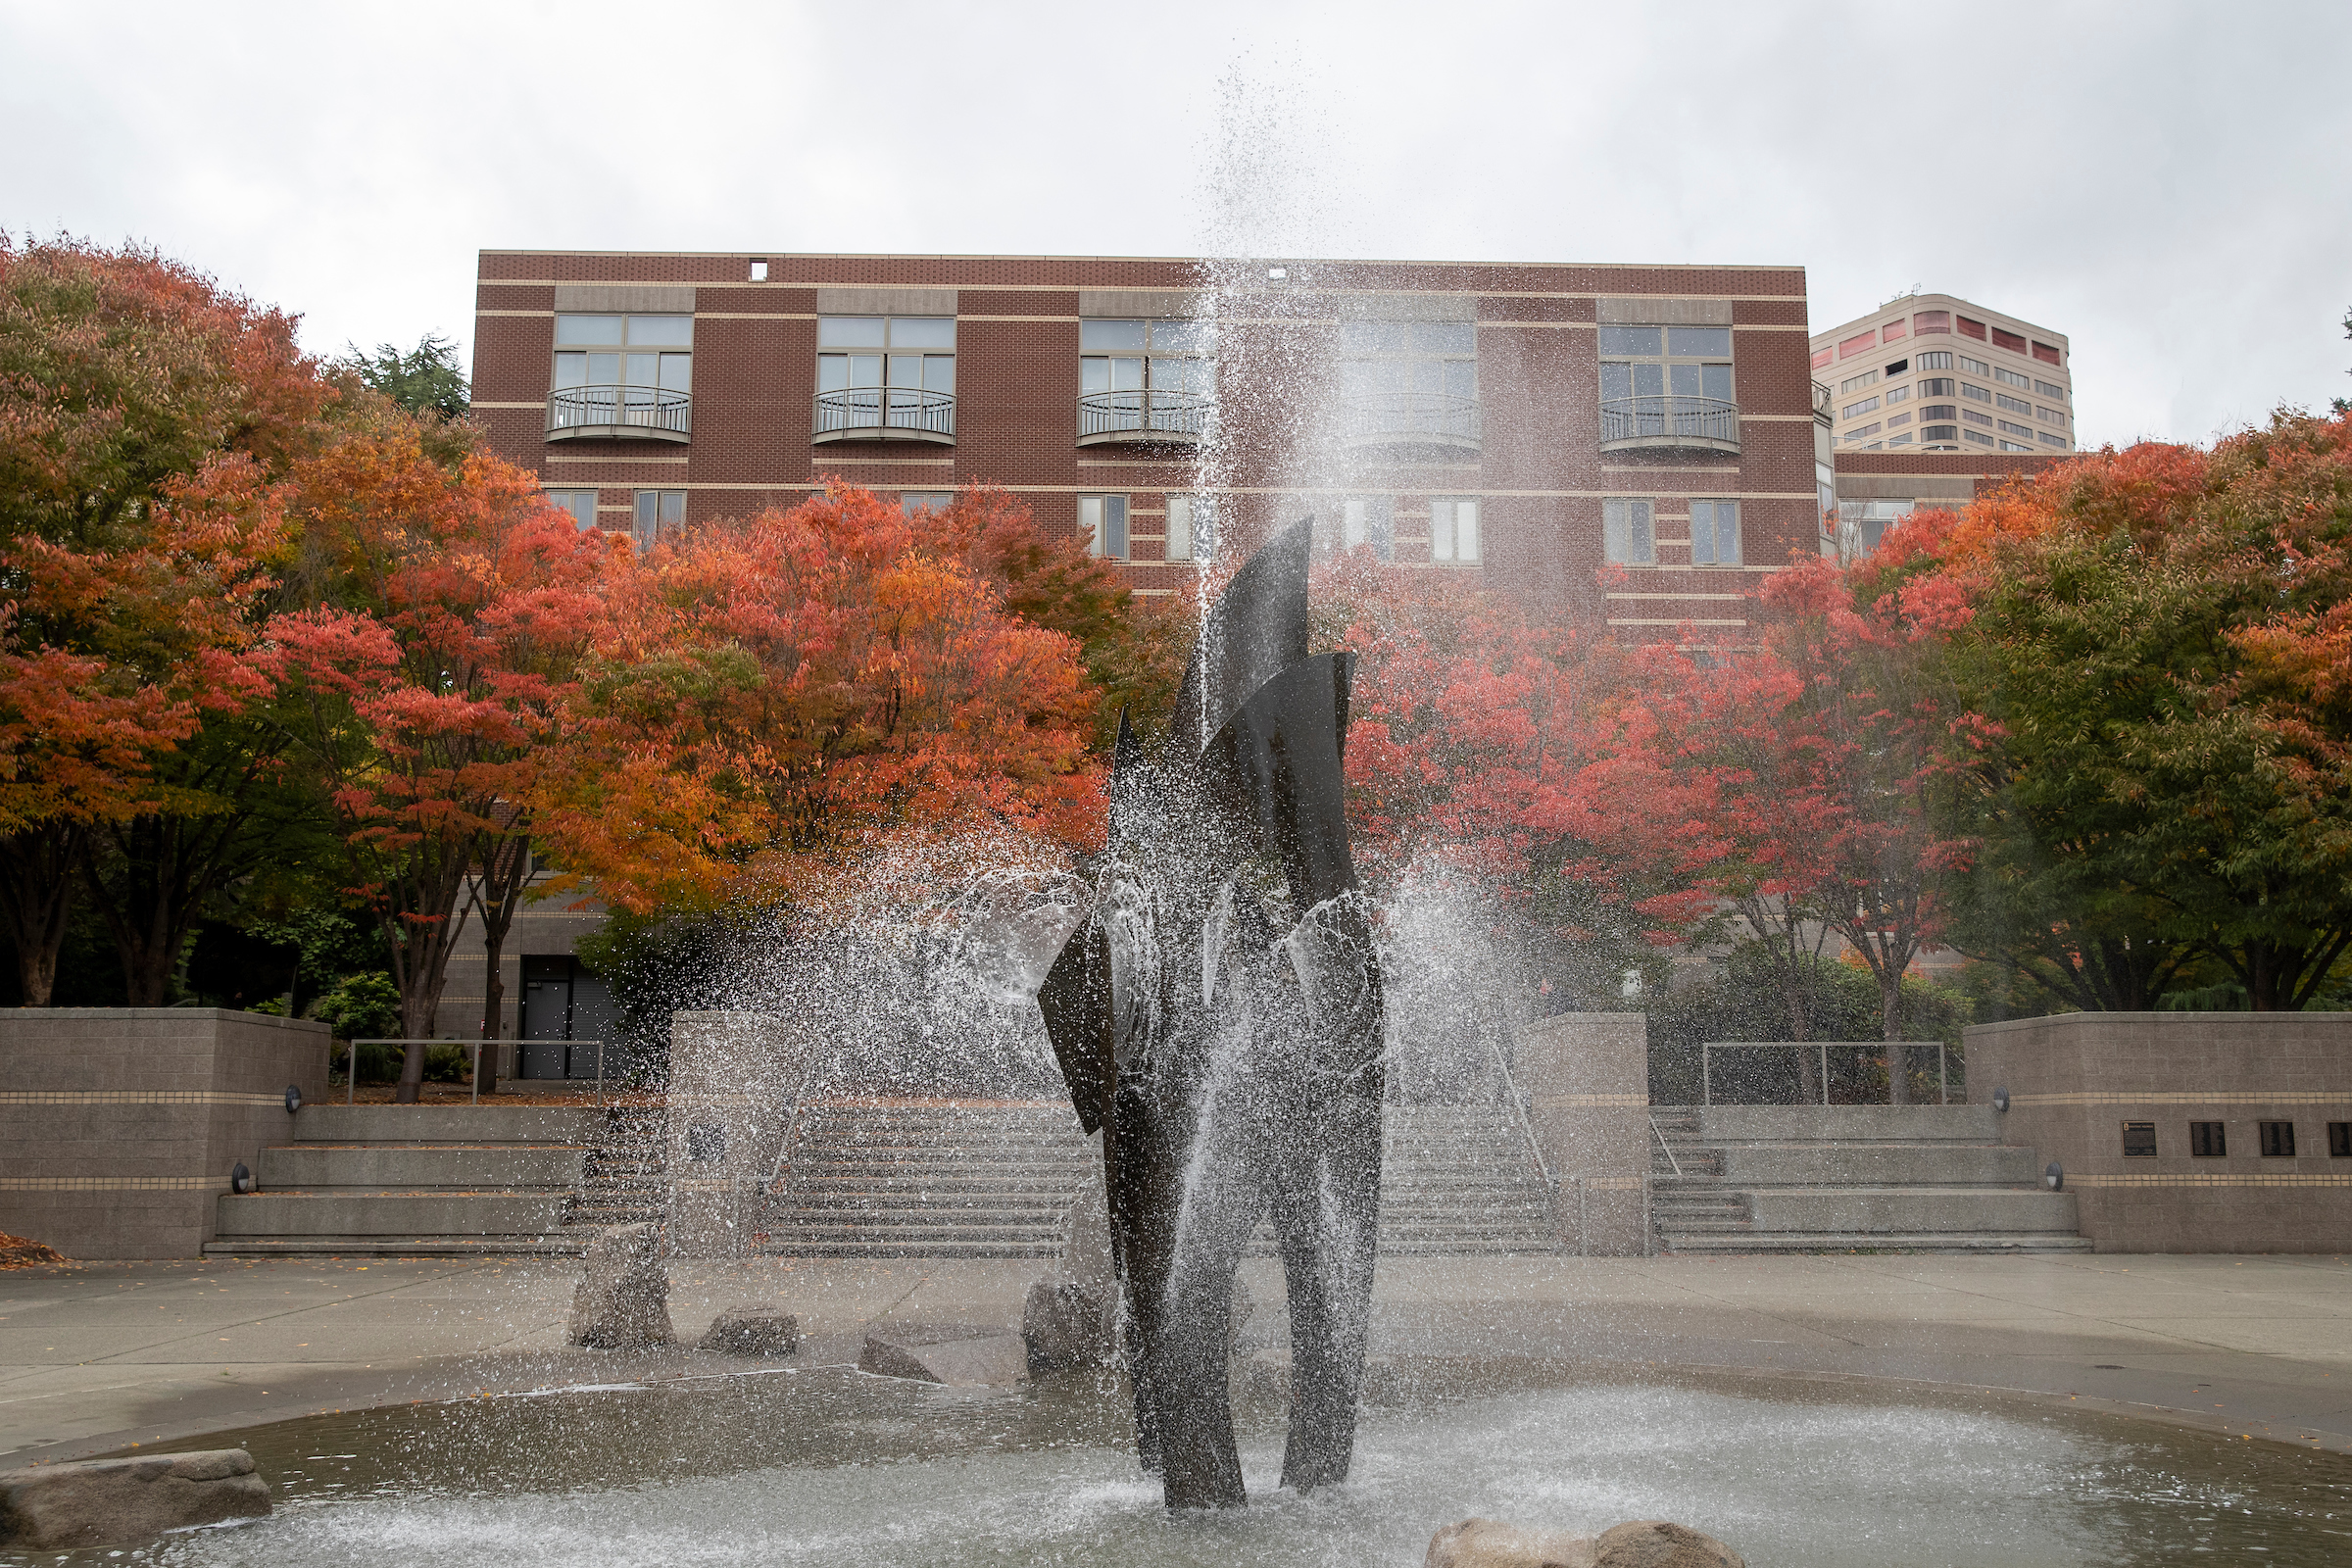 Fountain with autumn trees in the background